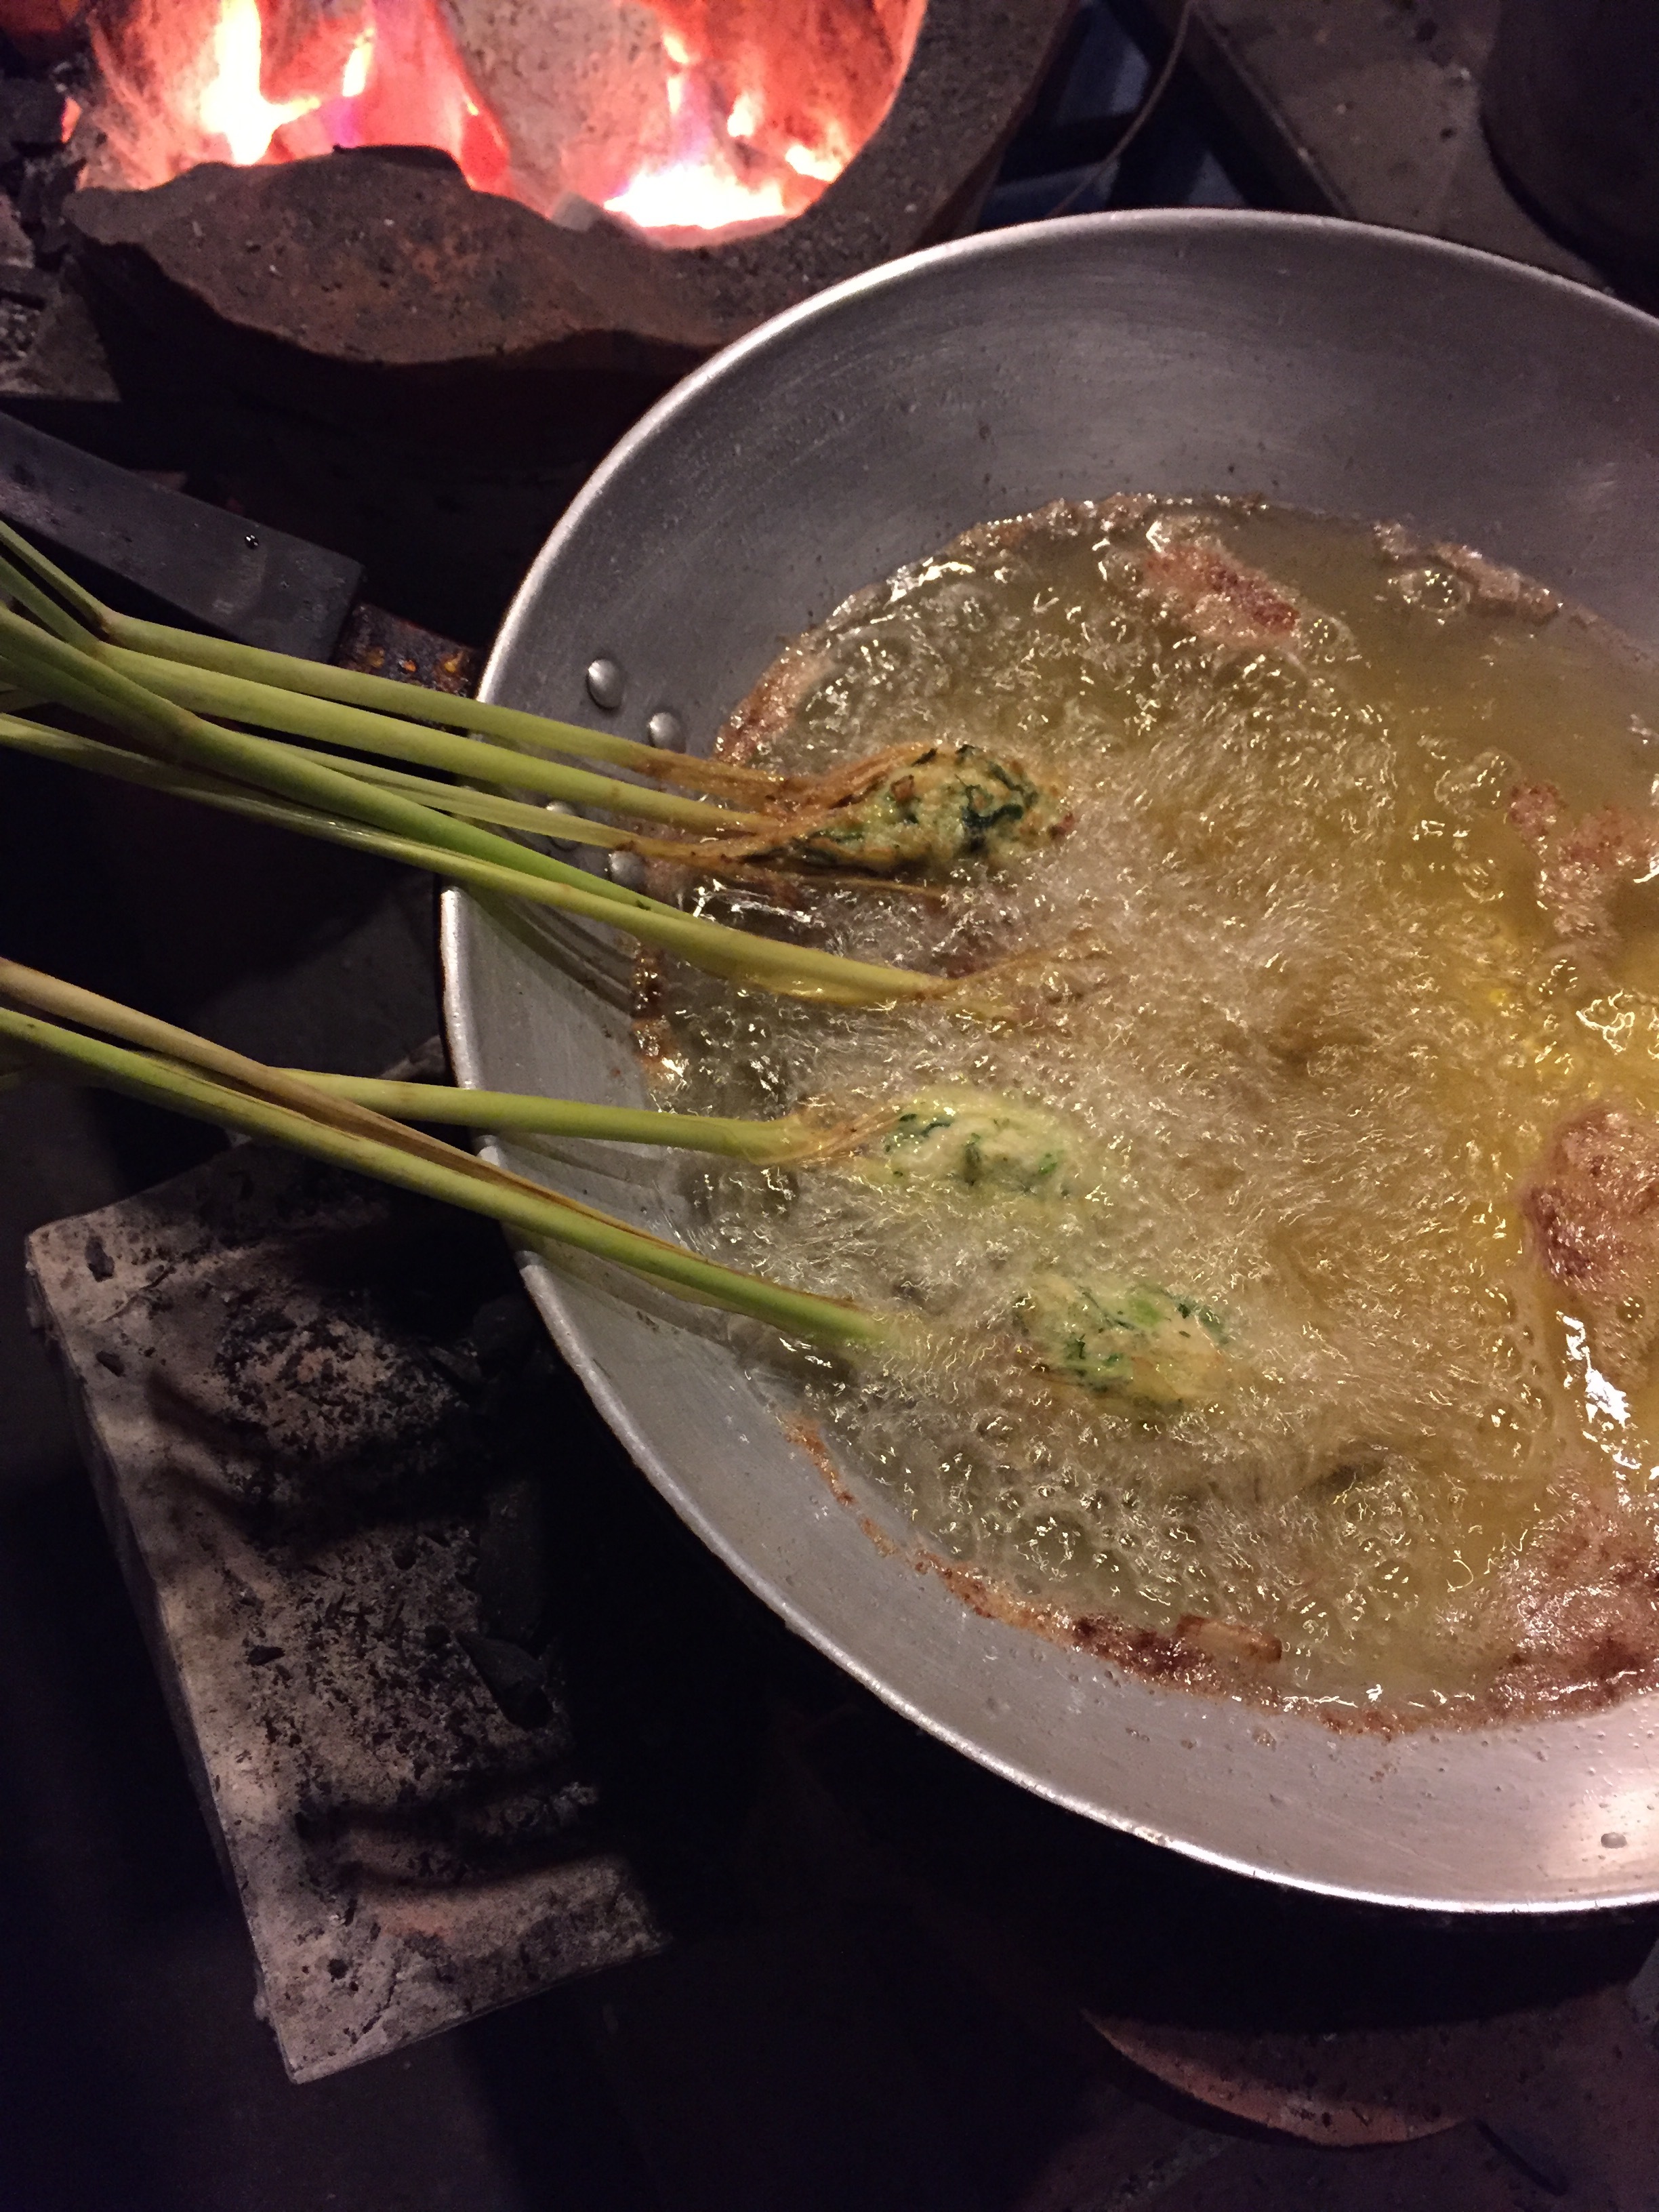 Frying our lemongrass stuffed with chicken